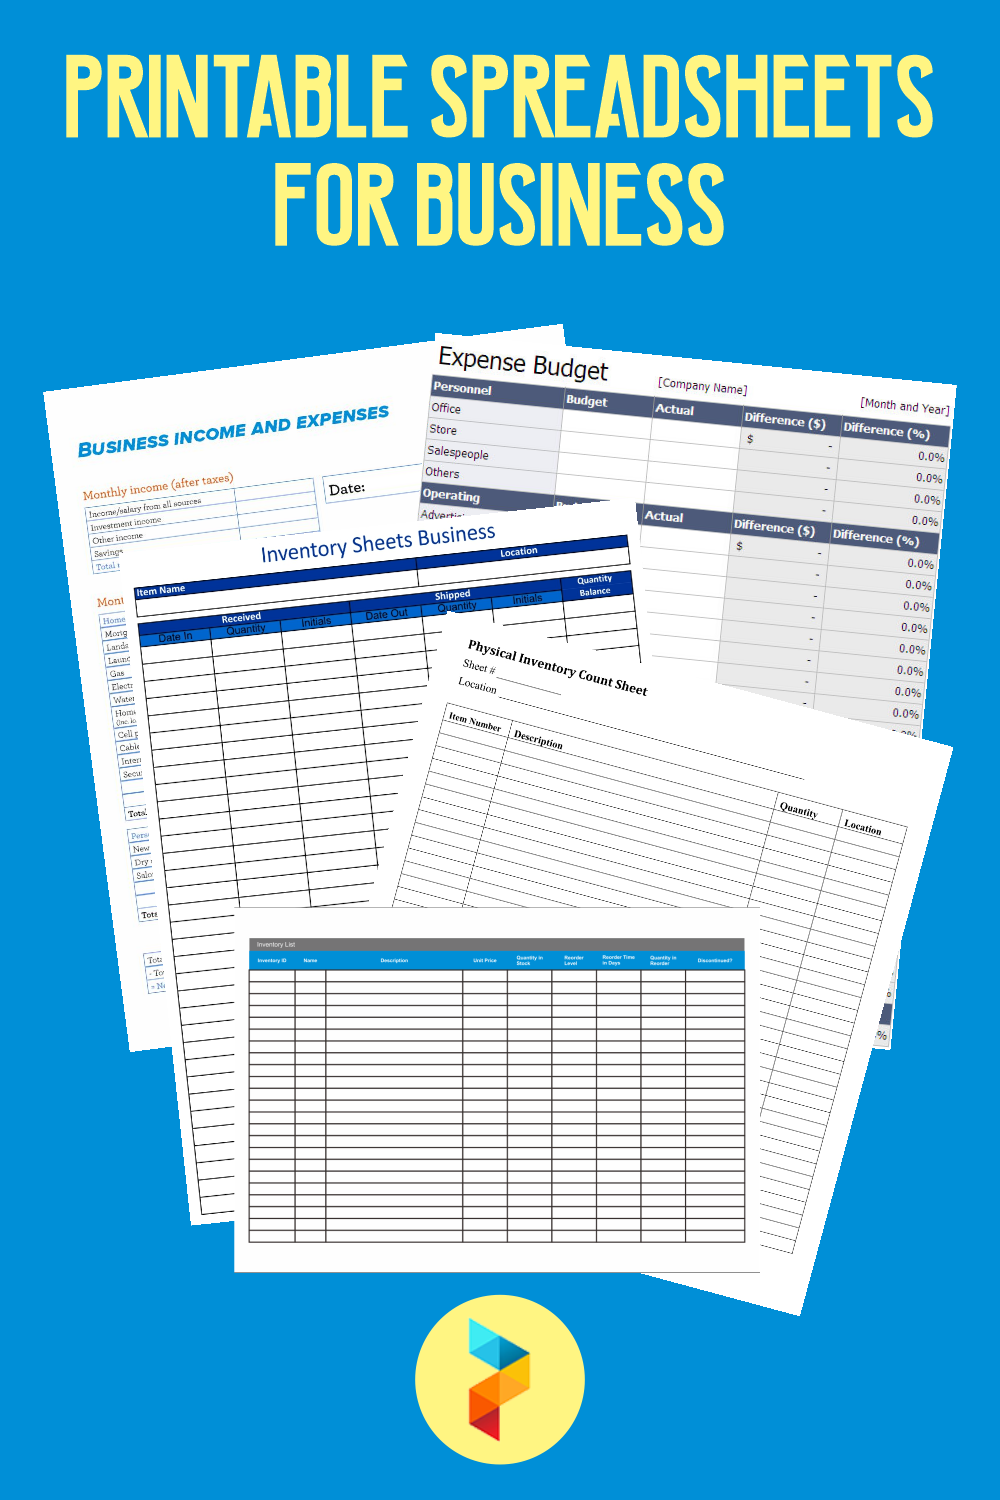 Printable Spreadsheets For Business